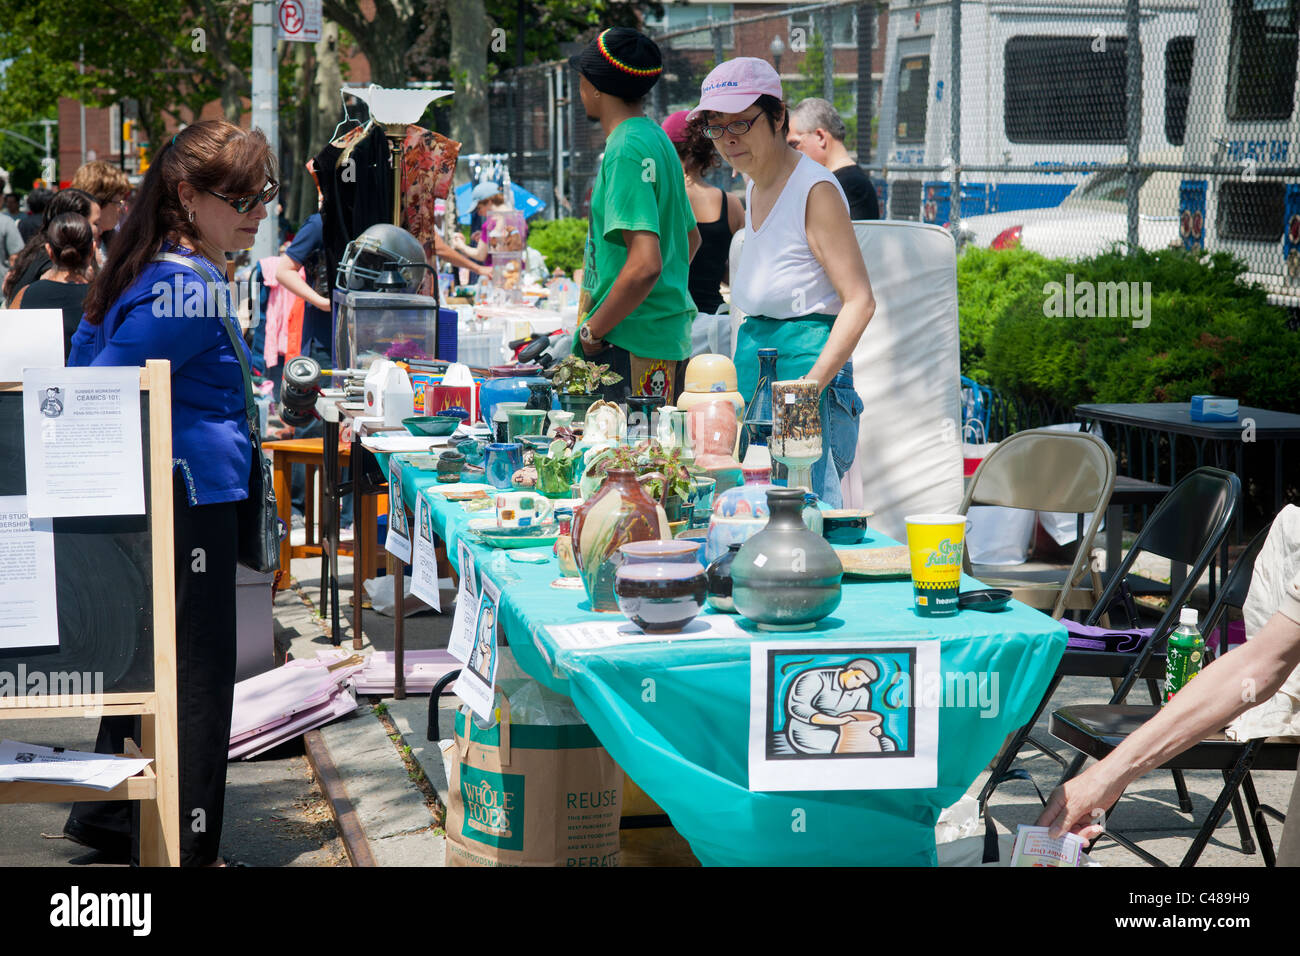 Shoppers search for bargains at a flea market in the New York neighborhood of Chelsea Stock Photo